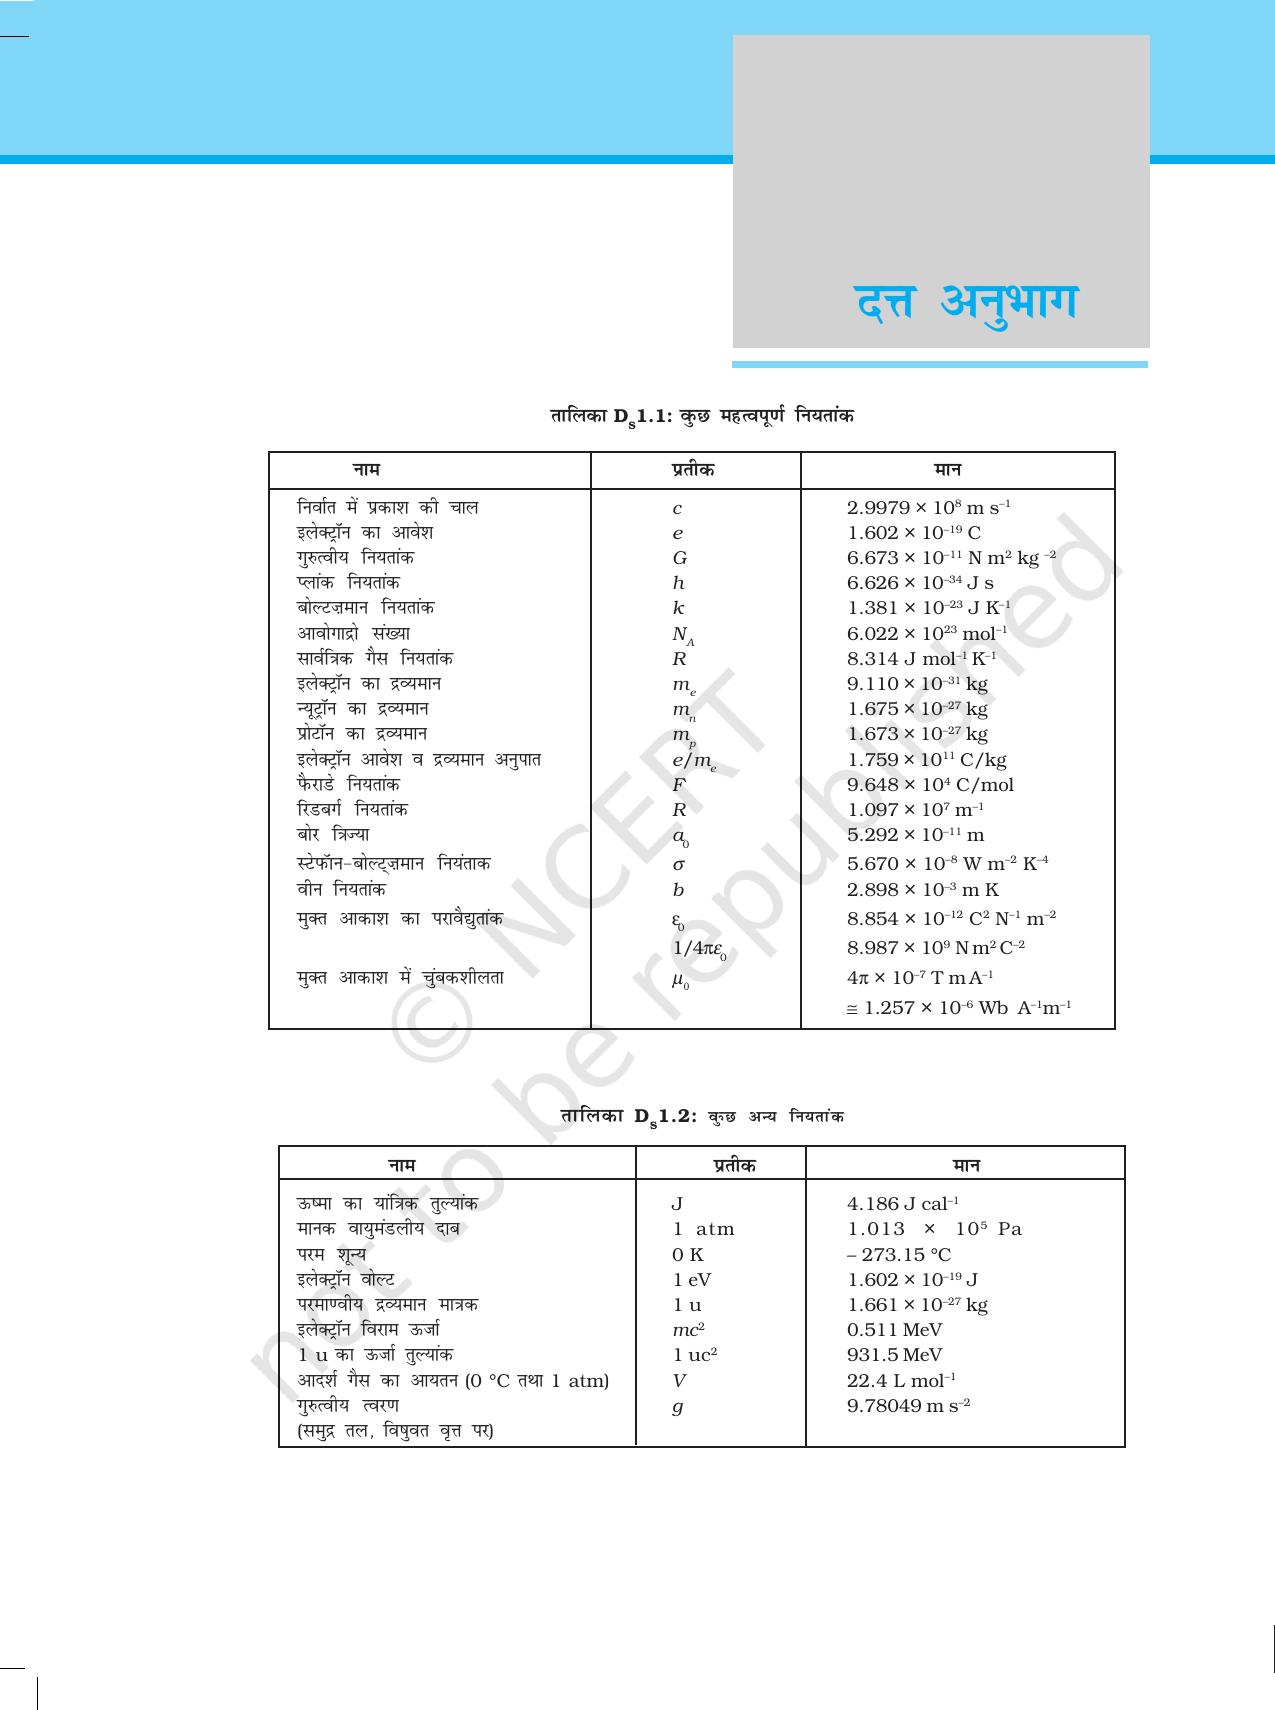 NCERT Laboratory Manuals for Class XII भौतिकी - दत्त अनुभाग - Page 1